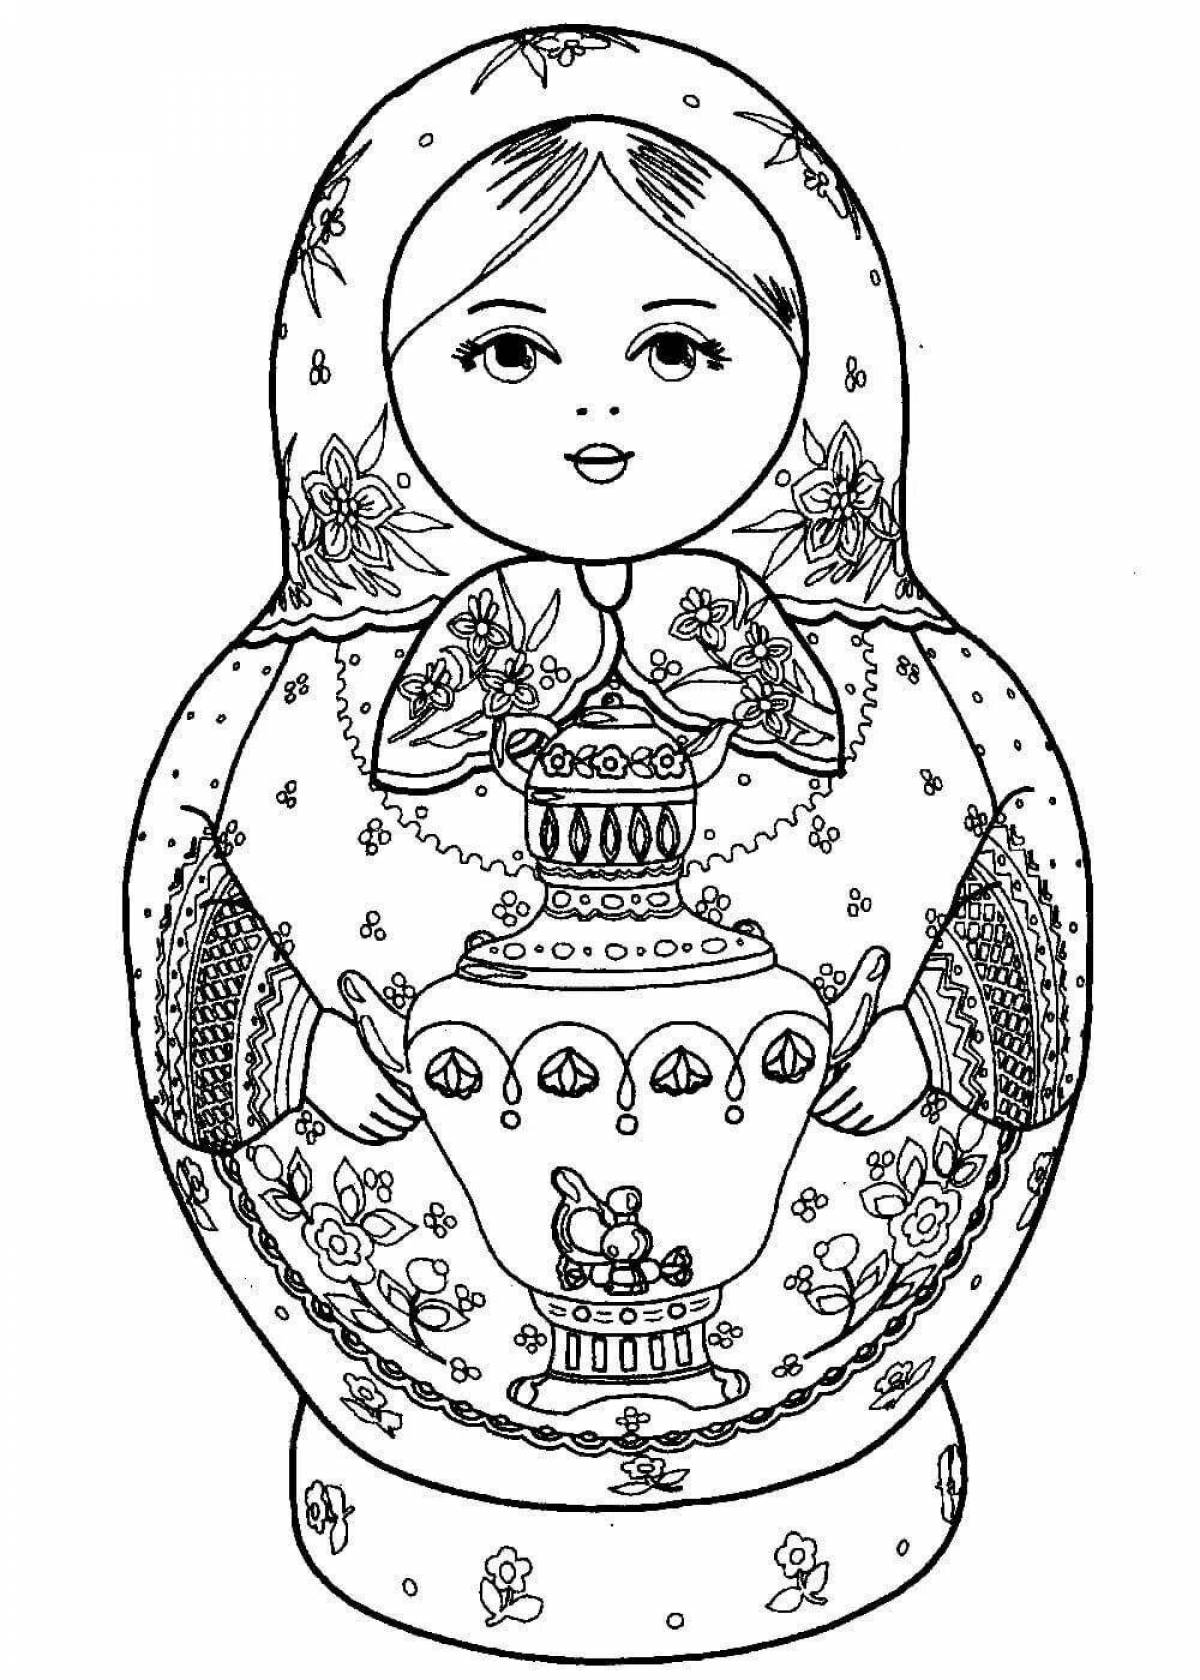 Wonderful Russian matryoshka coloring book for children 6-7 years old